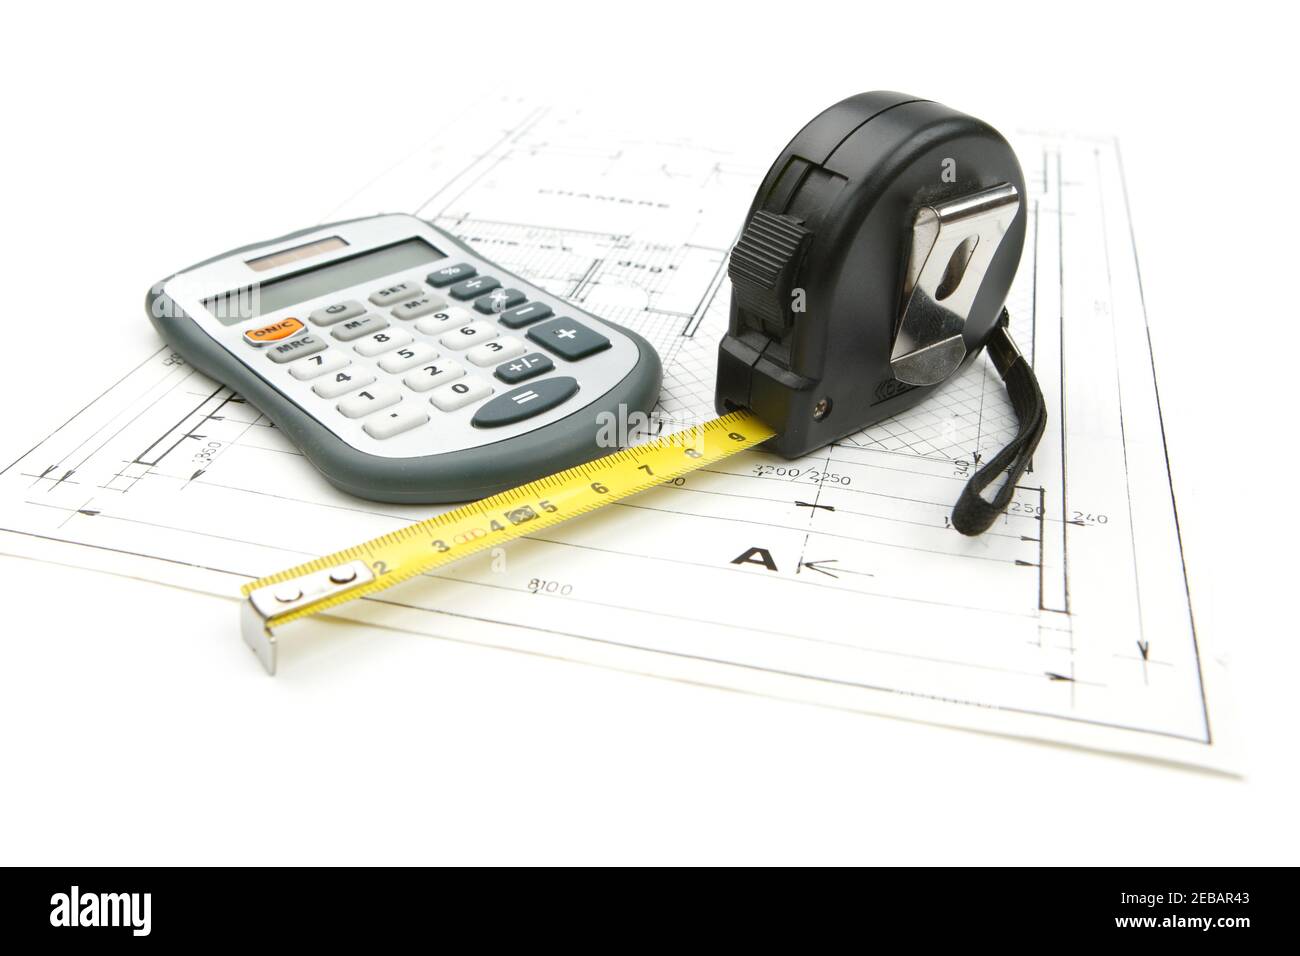 Tape measure with a calculator on the drawing plan of architectural and  construction project, isolated on white background Stock Photo - Alamy